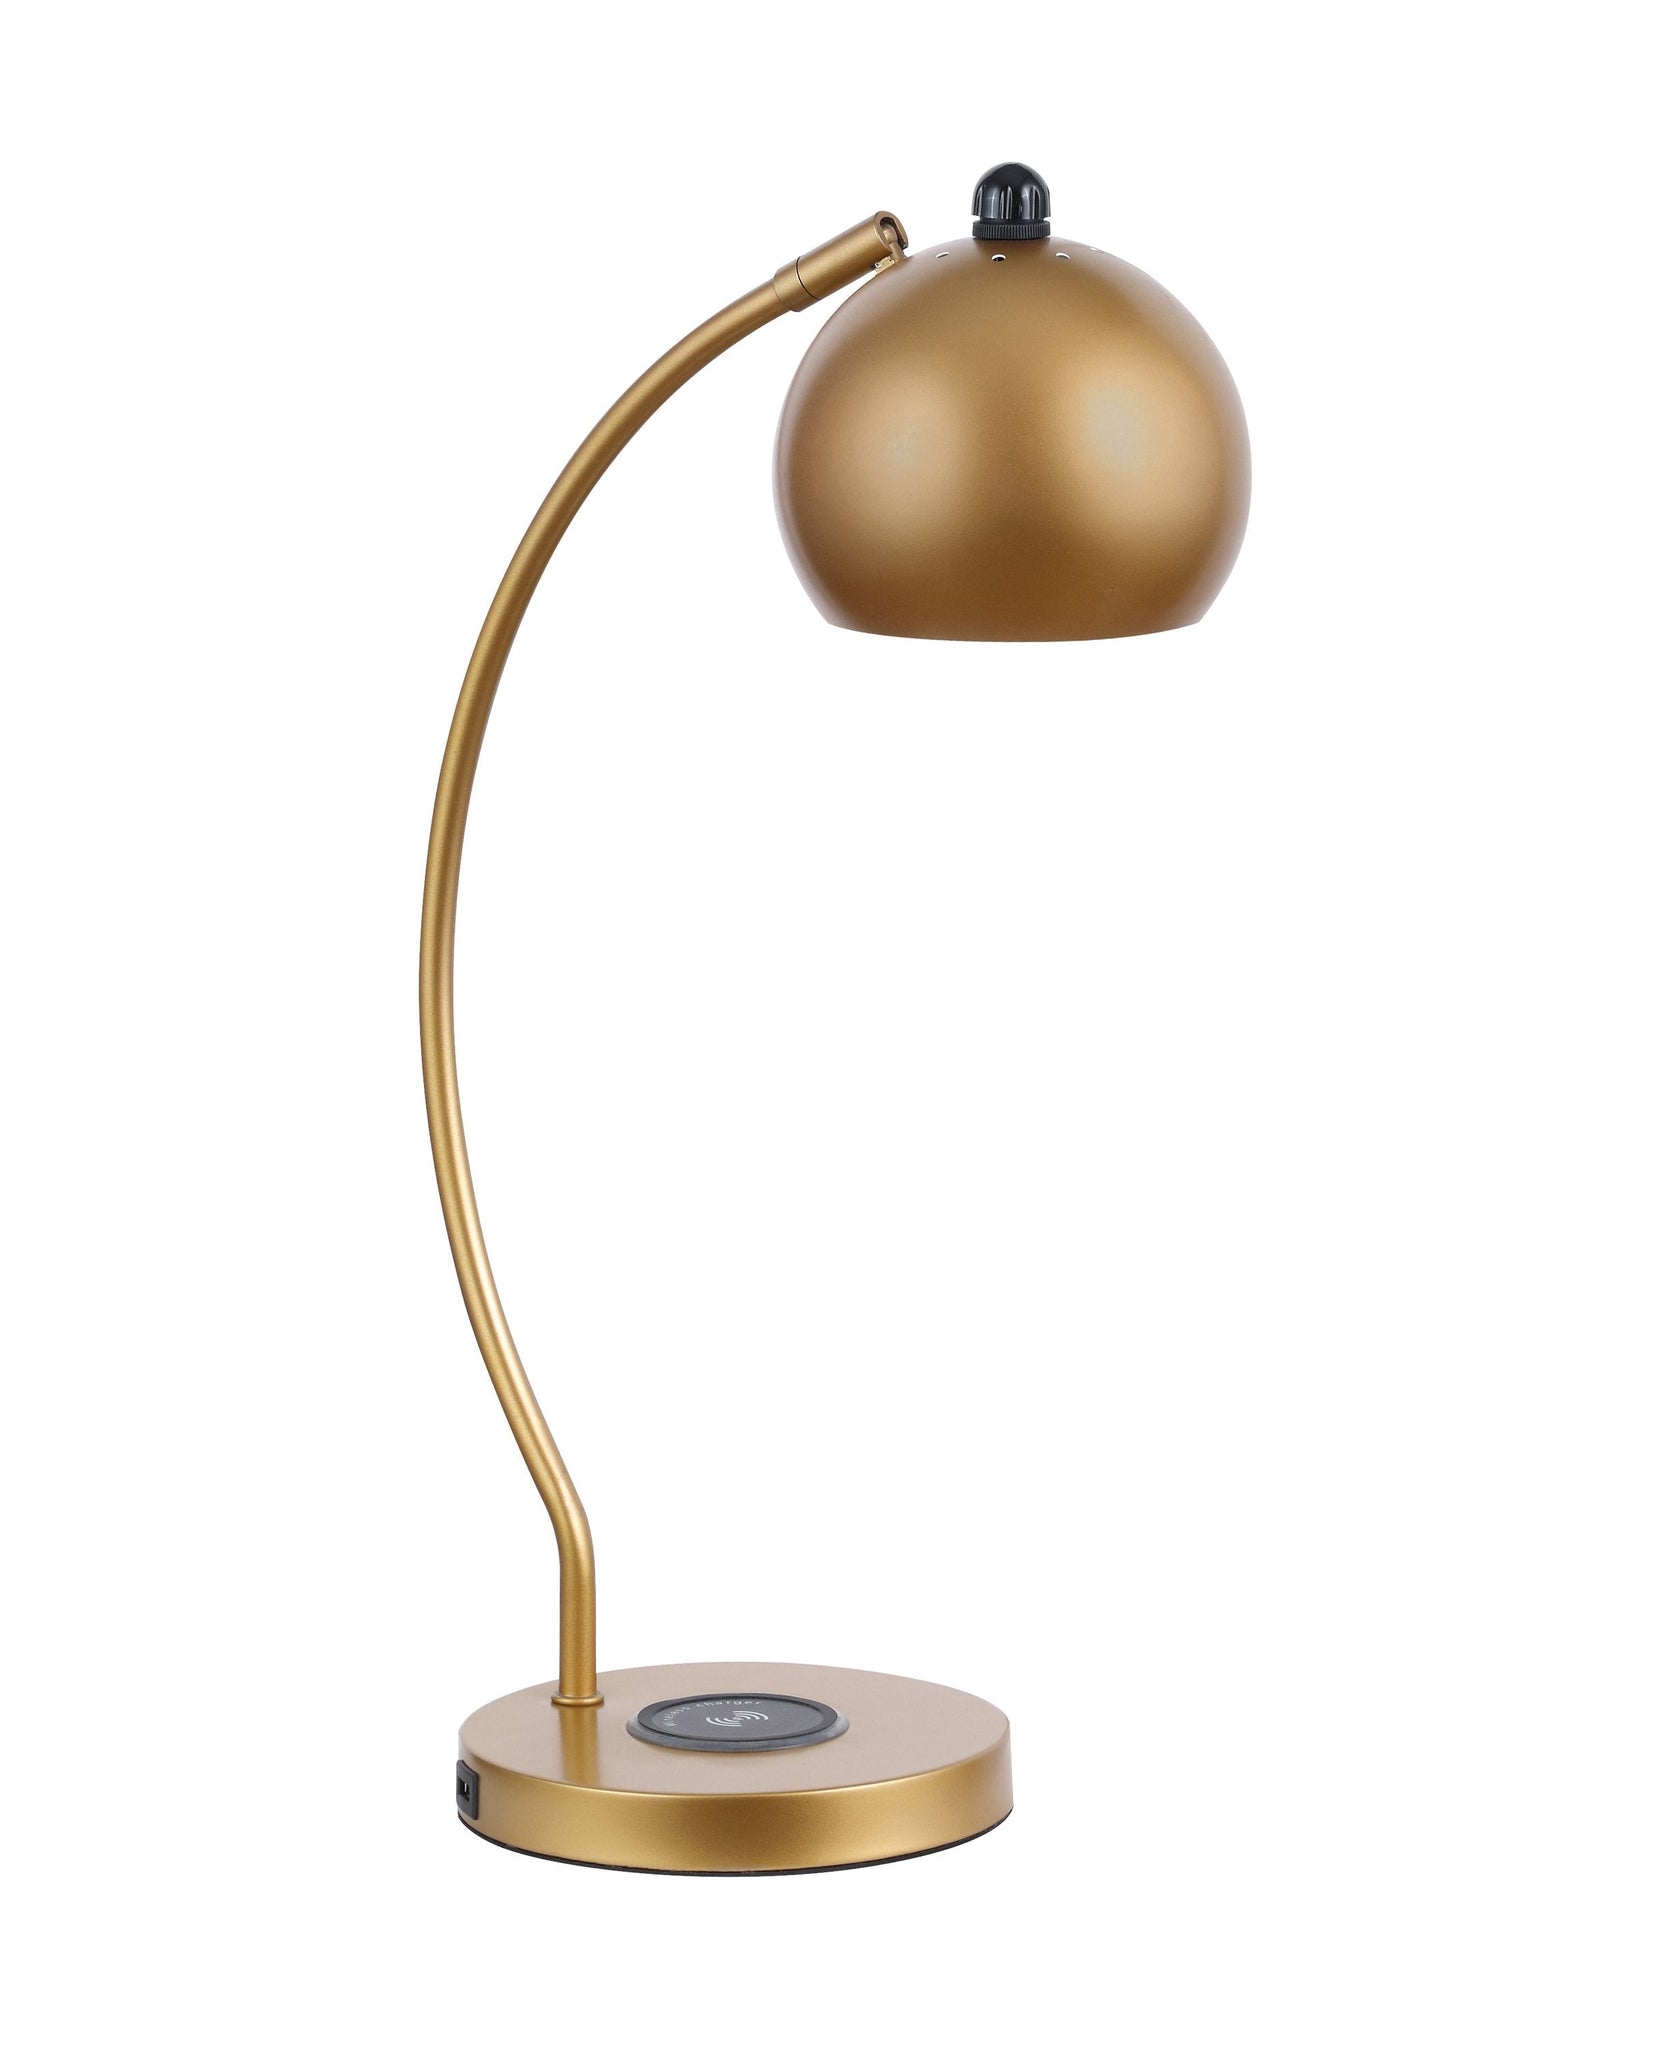 6 Month Rental | Golden Dome Lamp | From $28/mo